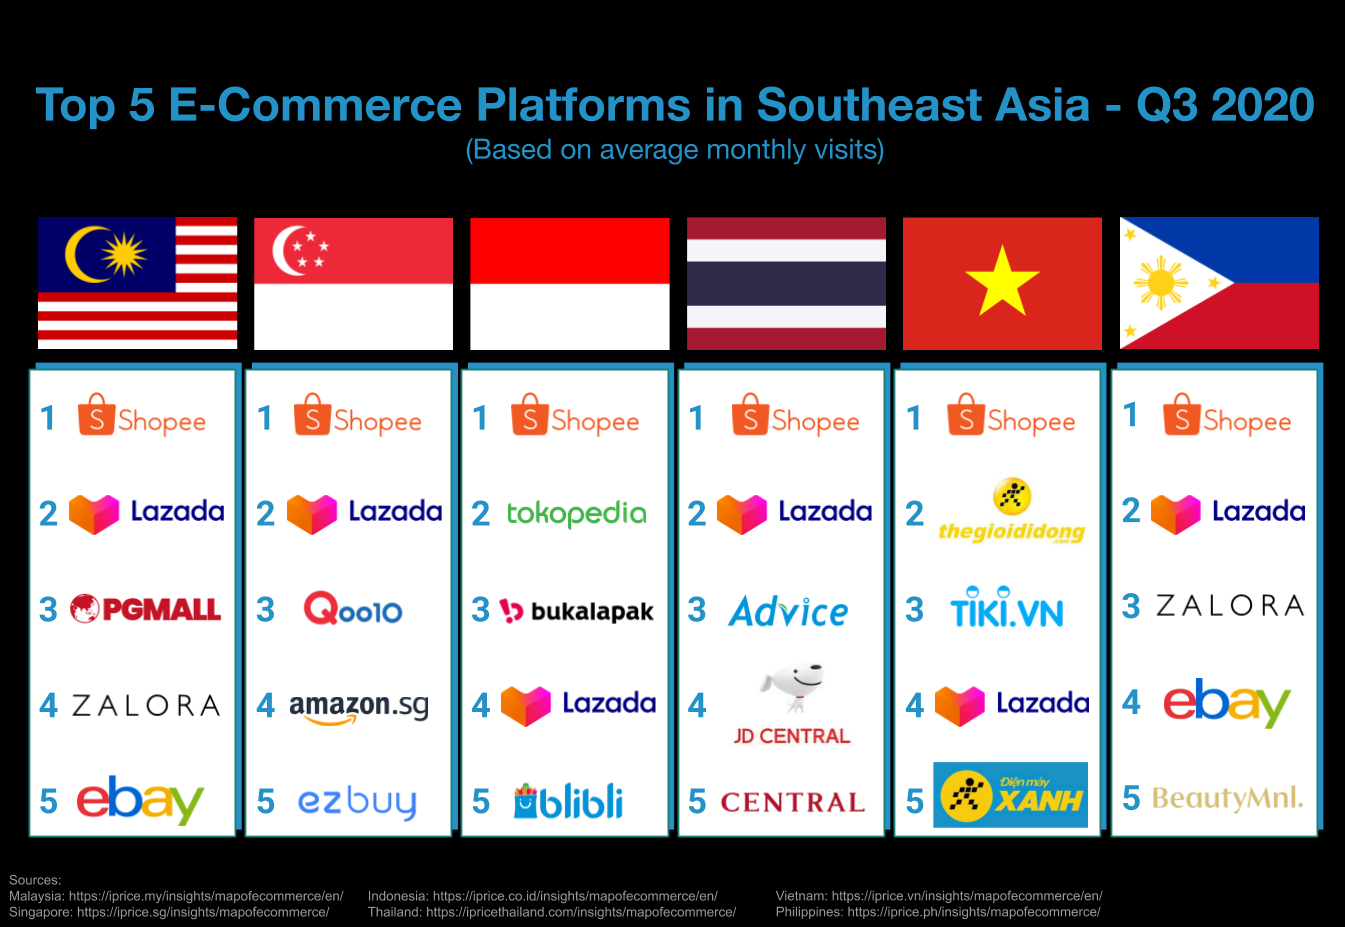 The Top 5 E-Commerce Platforms in Southeast Asia - Q3 2020